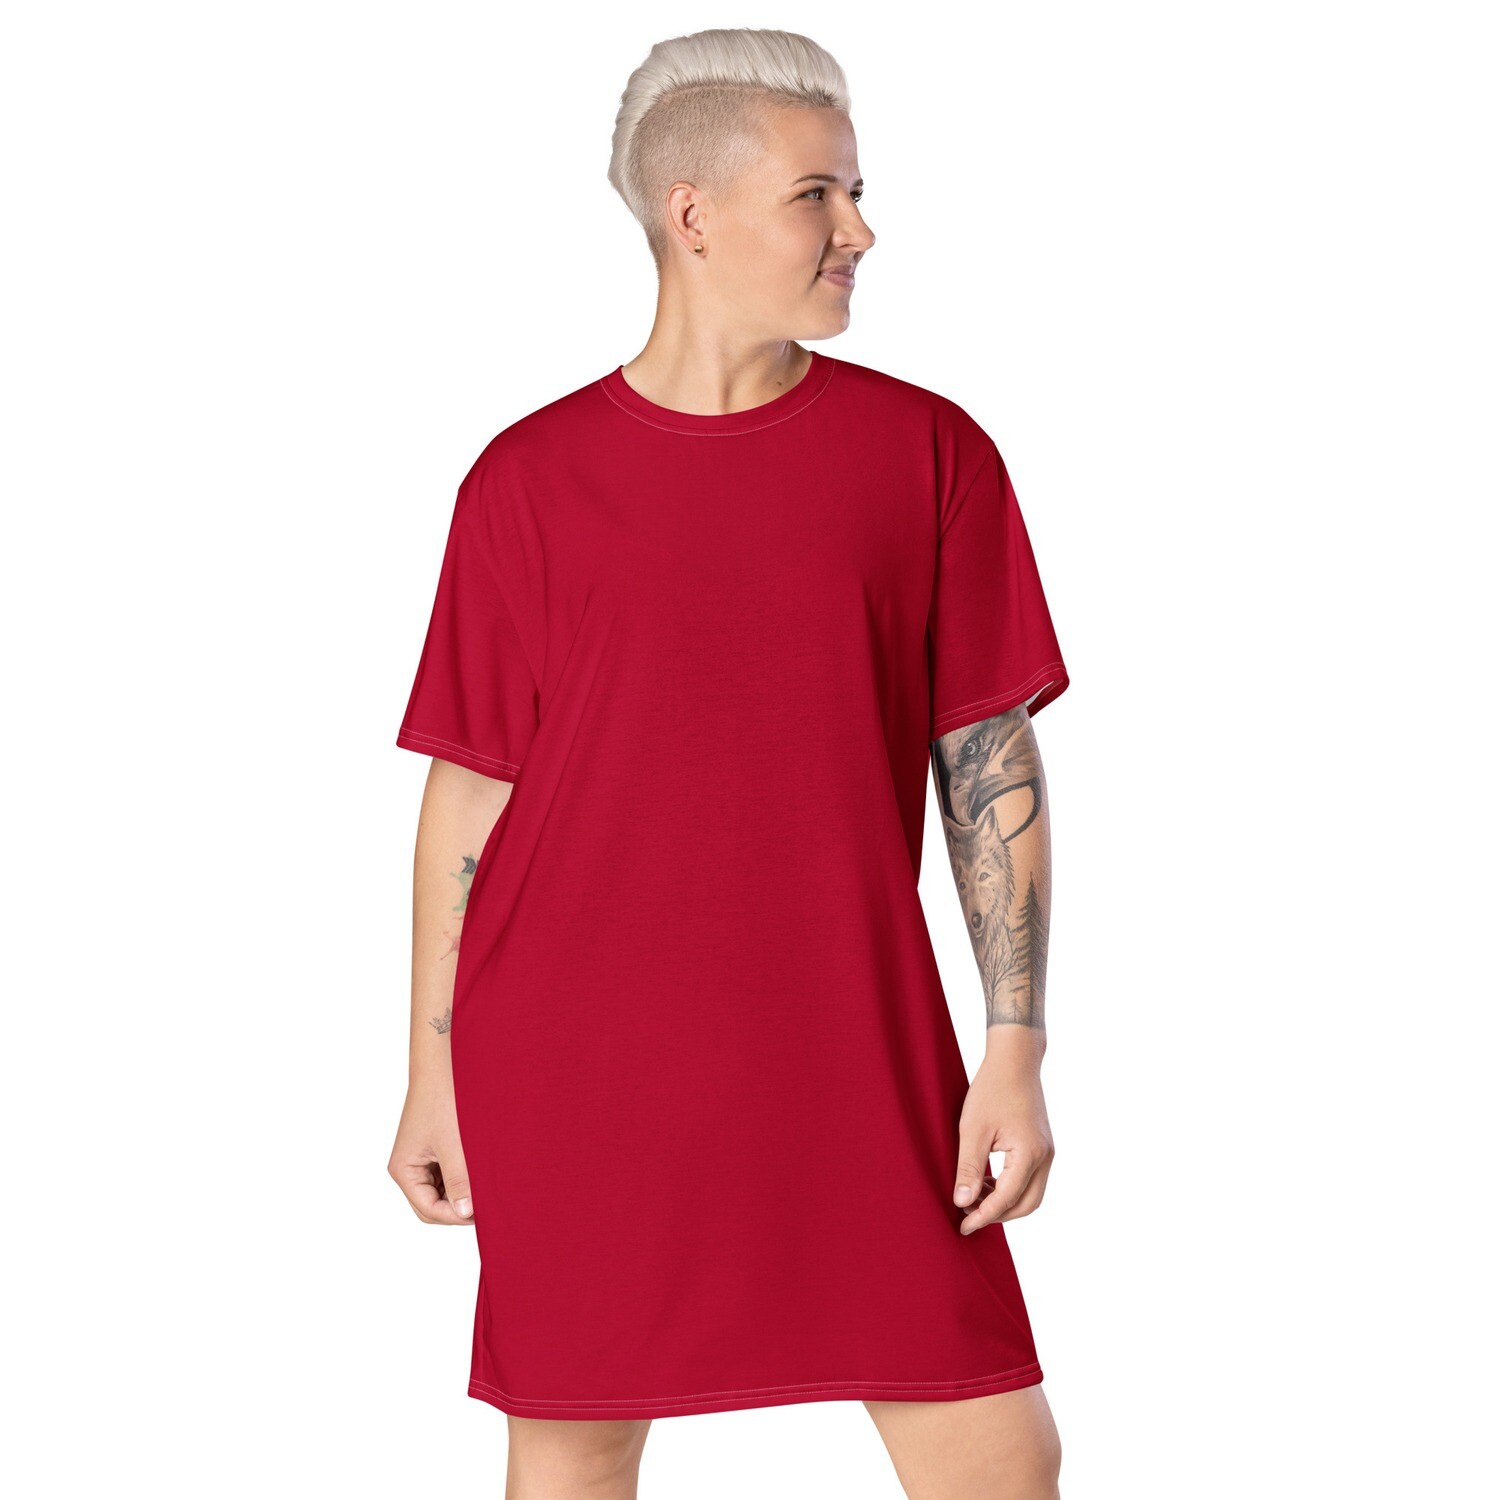 Hibiscus red t-shirt dress in sizes 2XS-6XL